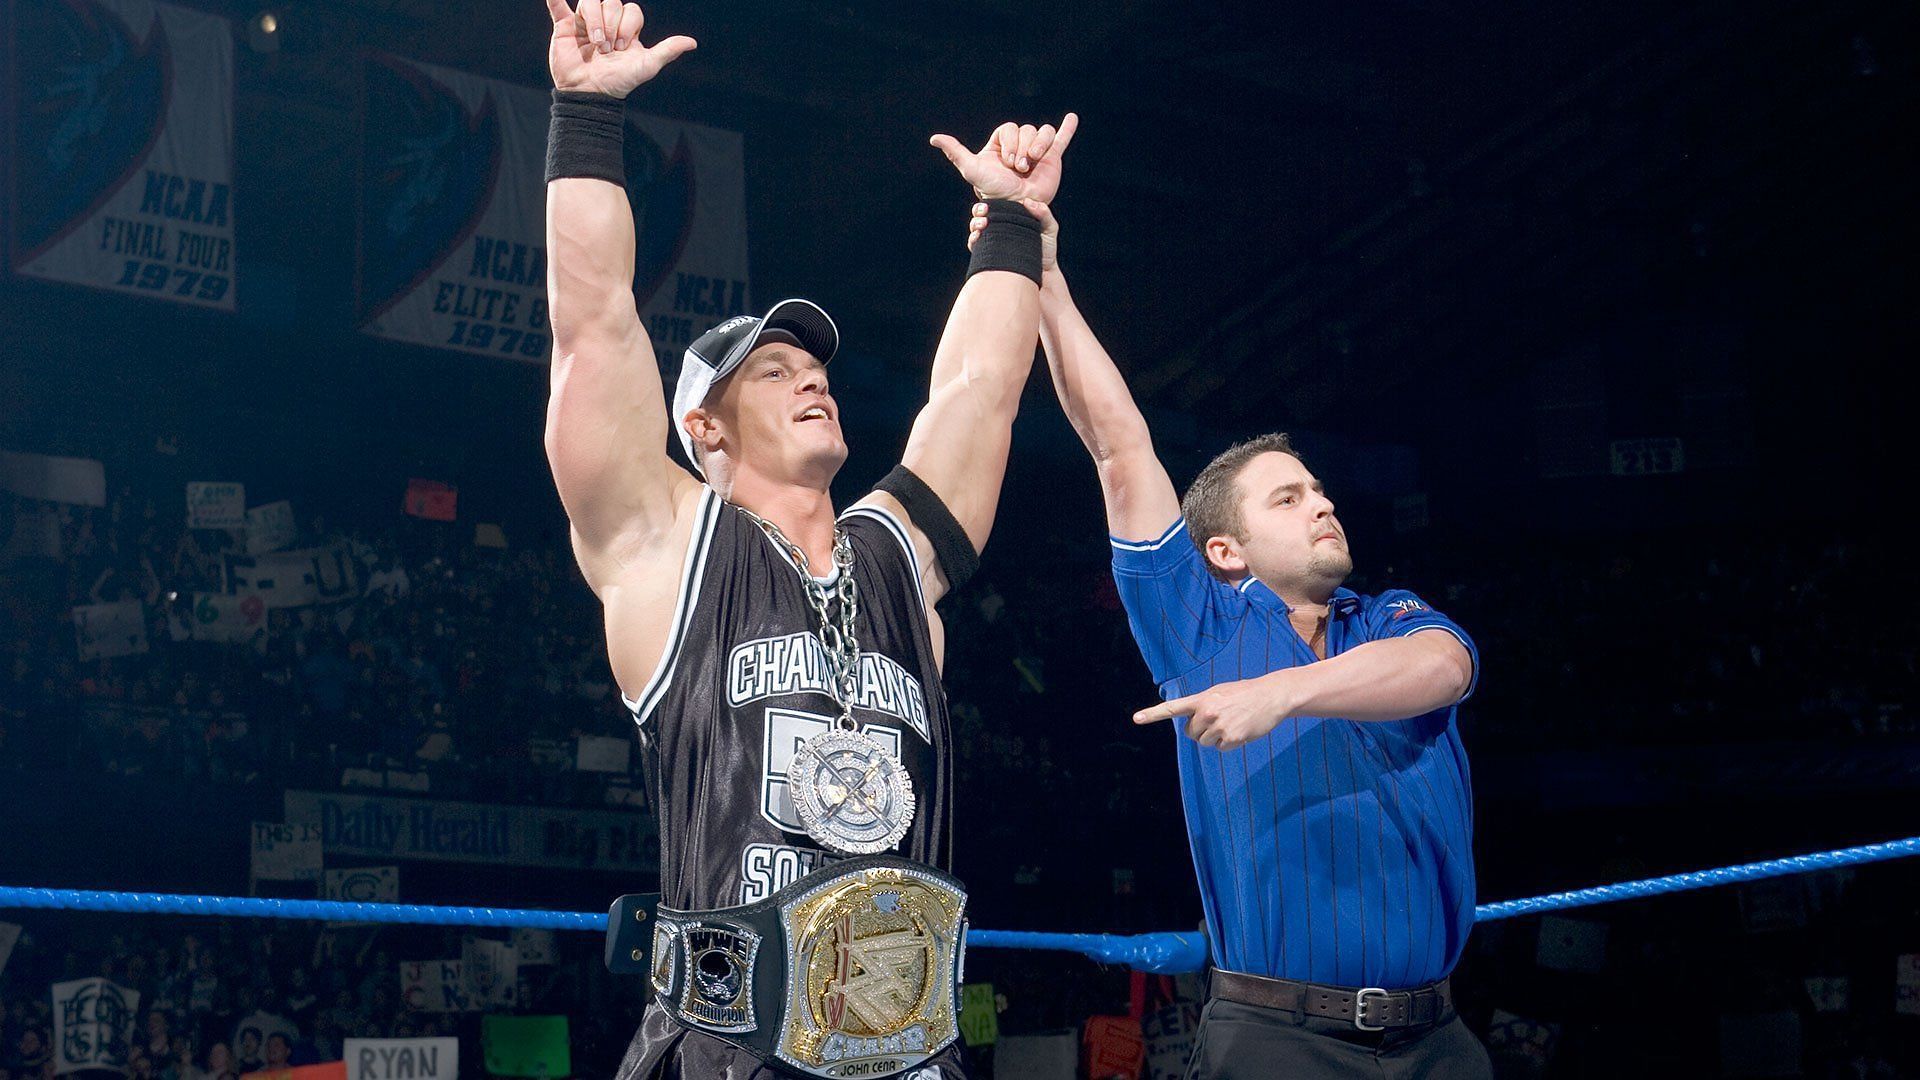 Cena went back-and-forth with the superstar in the mid-2000s